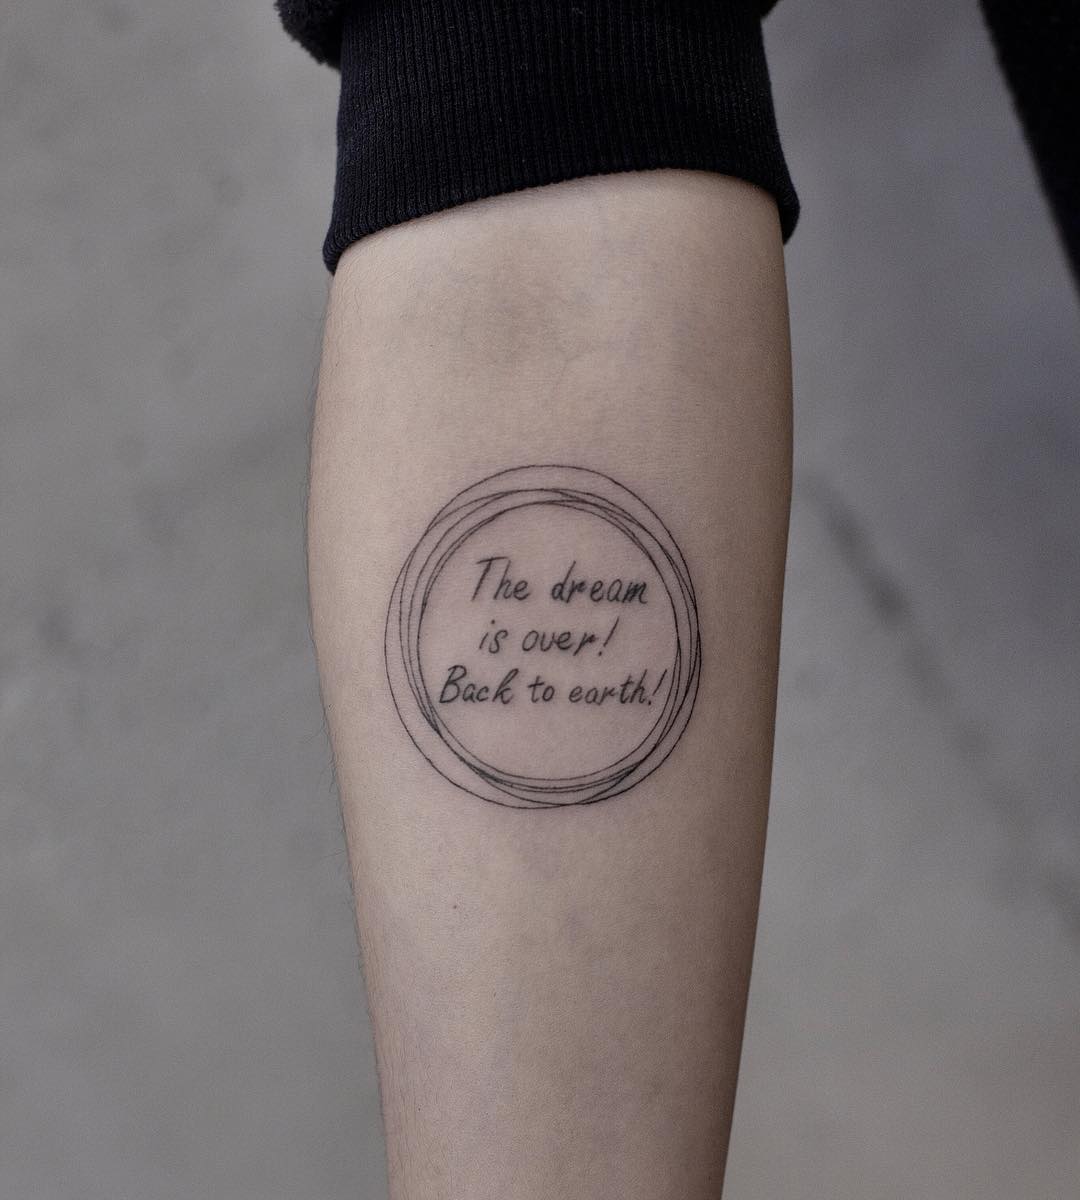 The dream is over tattoo by Aki Wong